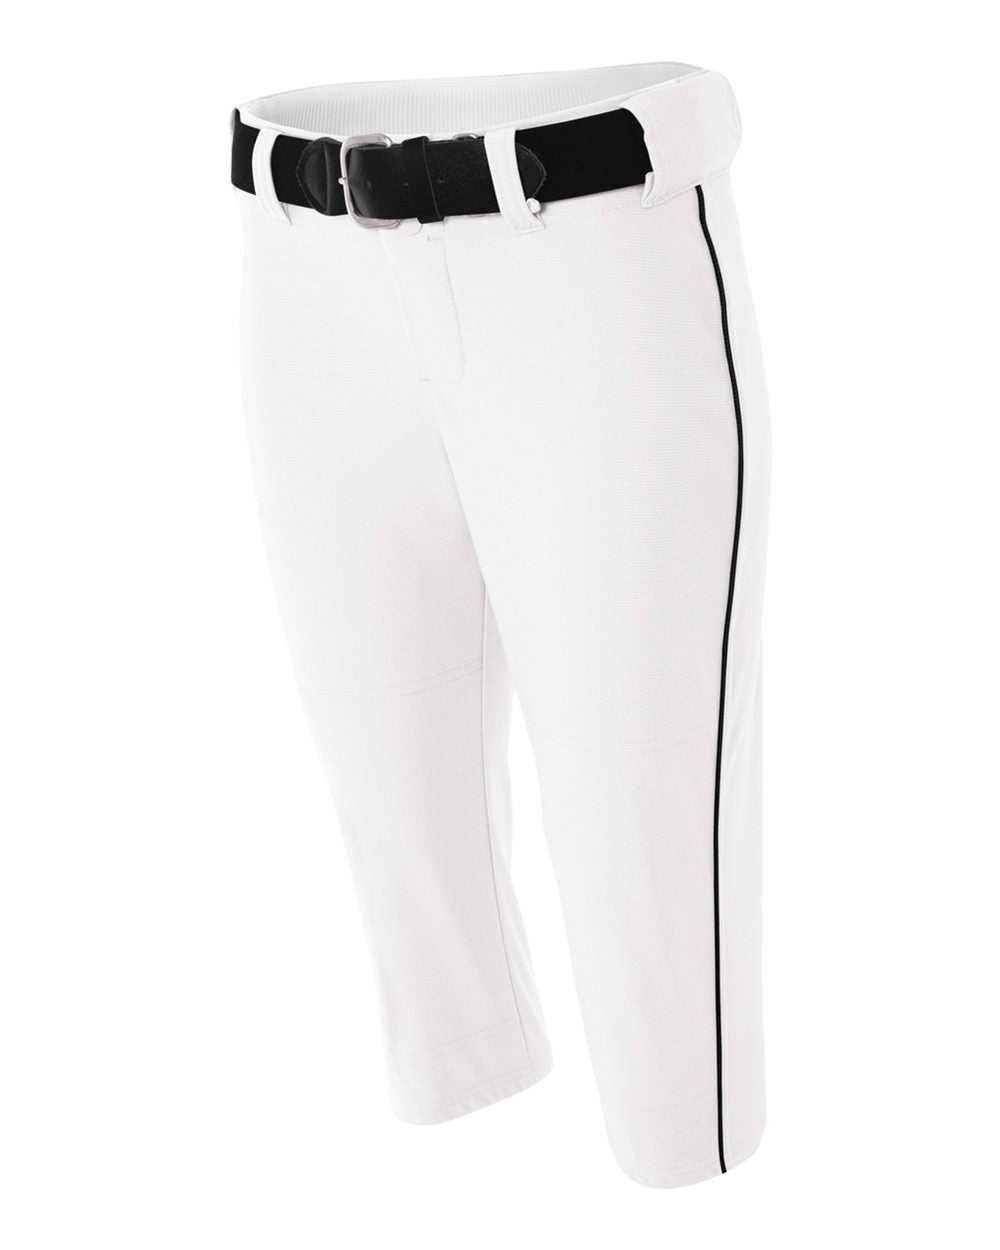 A4 NW6188 Womens Softball Pant with Cording - White Black - HIT a Double